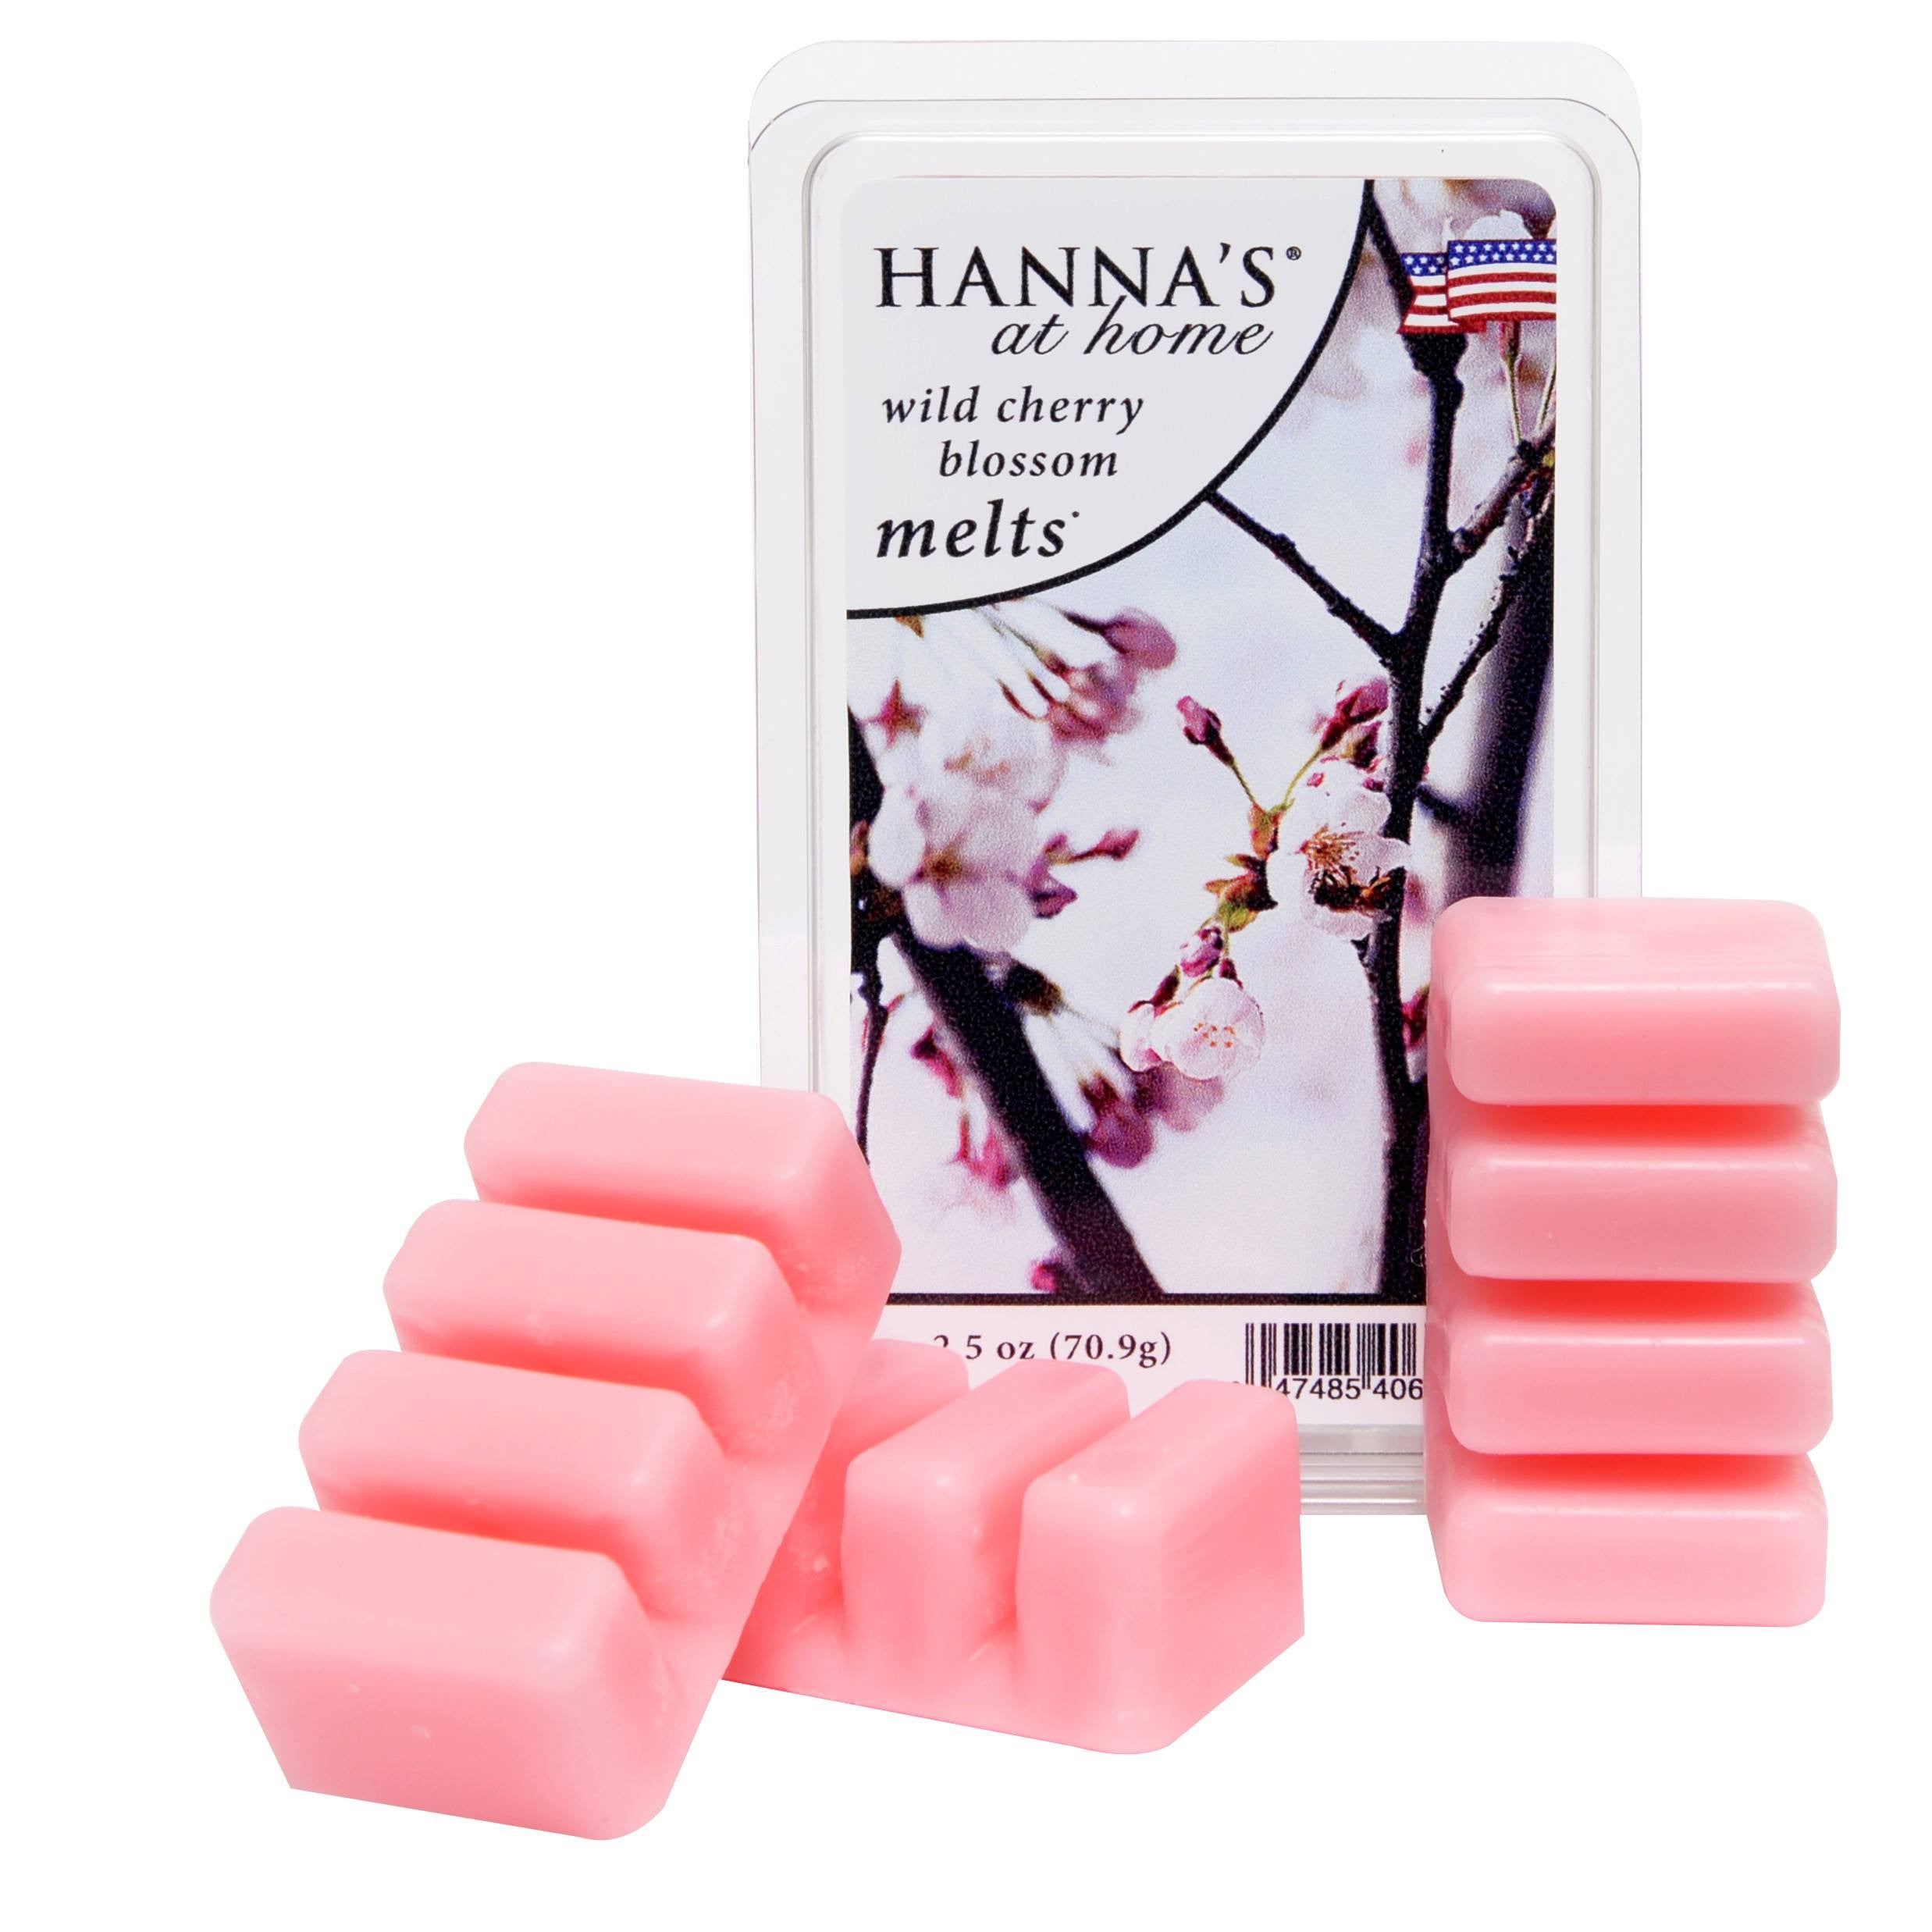 Buy Wild Cherry Blossom Scented Wax Melts at for only 1.99